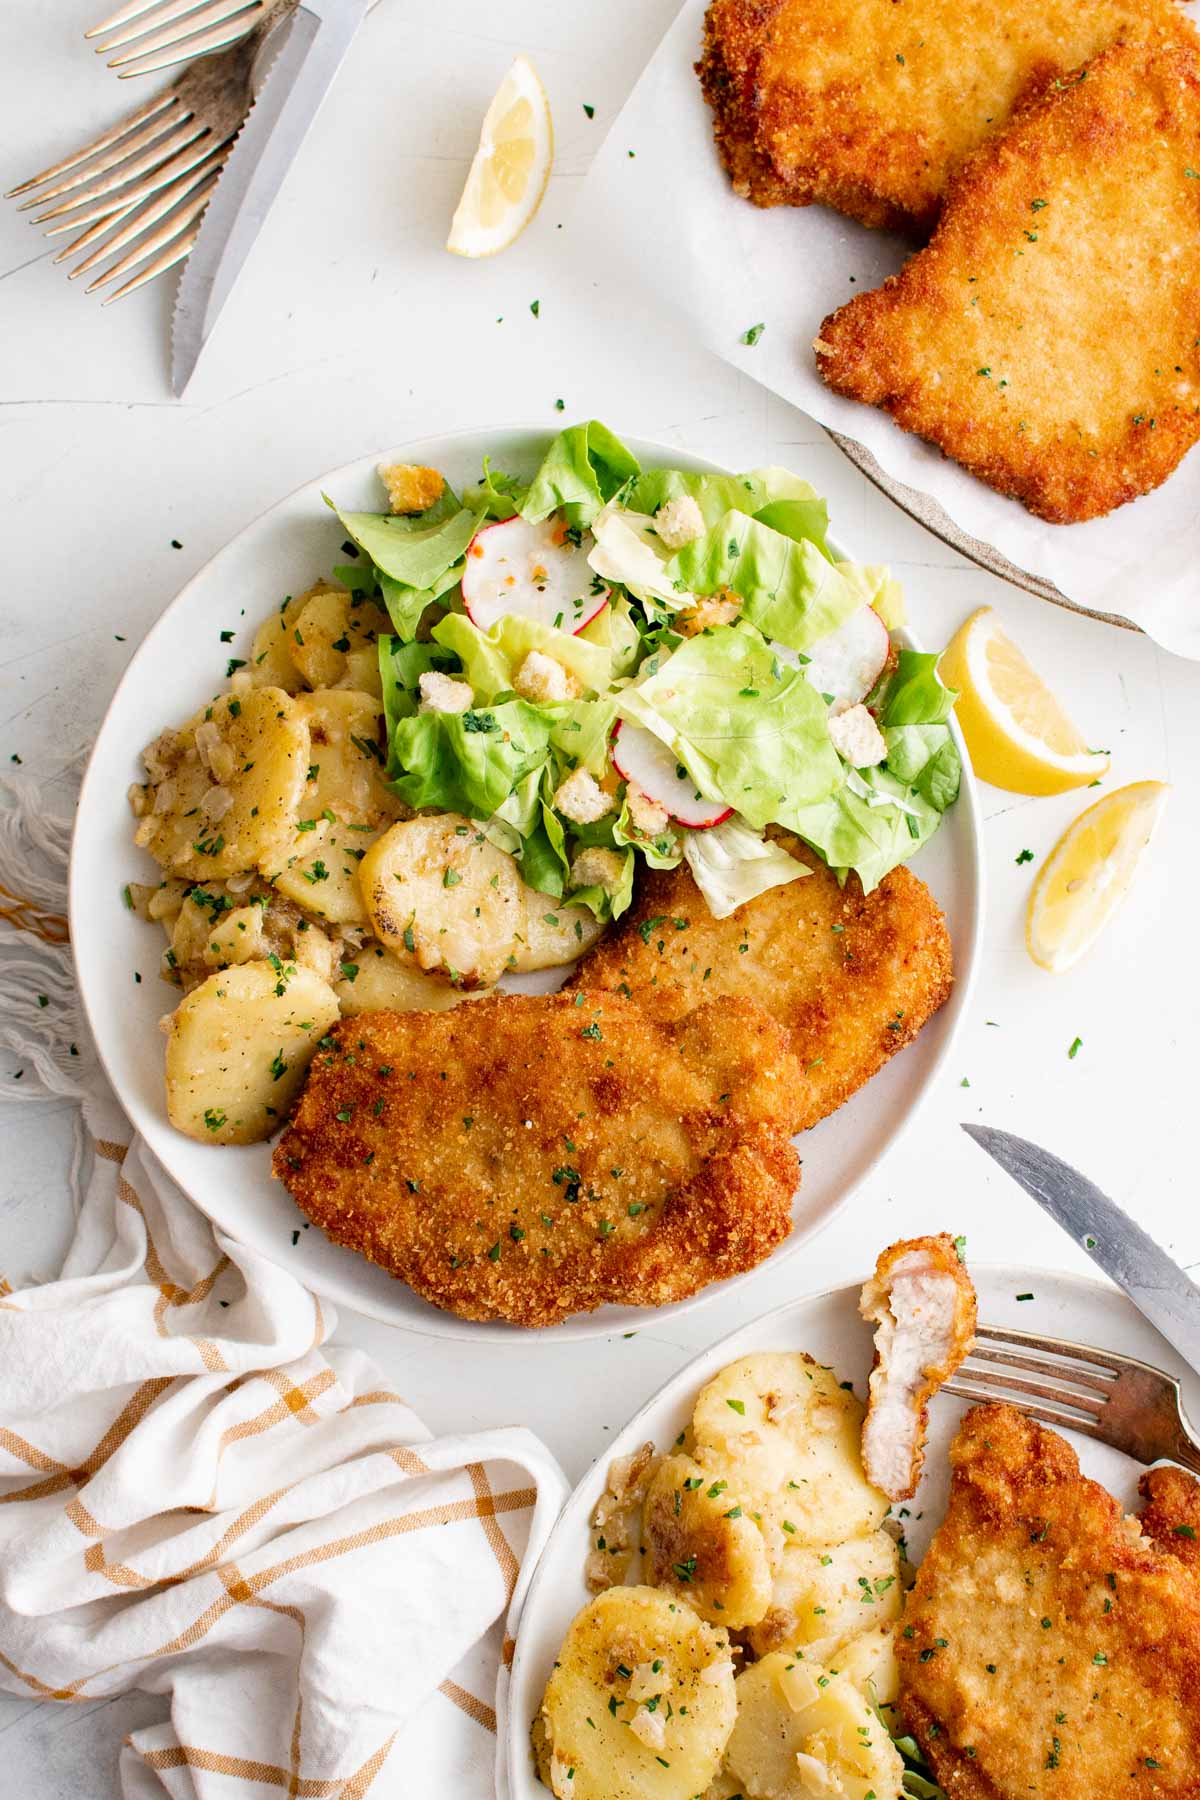 Pork Schnitzel, fried potatoes and salad on white plates.